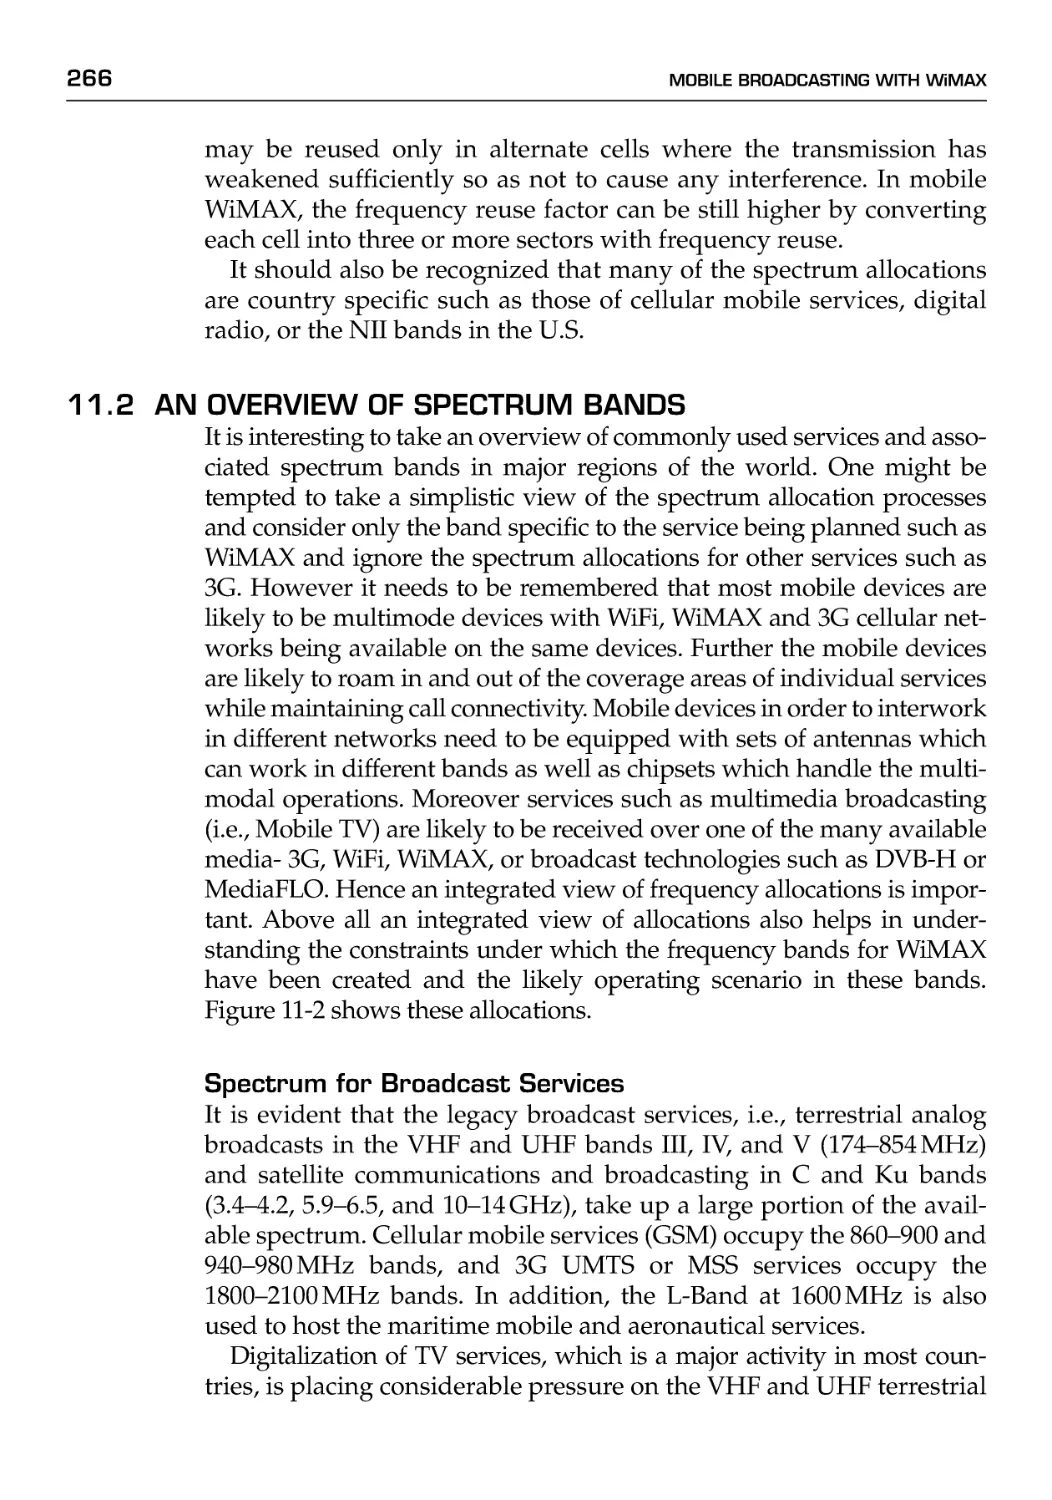 11.2 An overview of spectrum bands